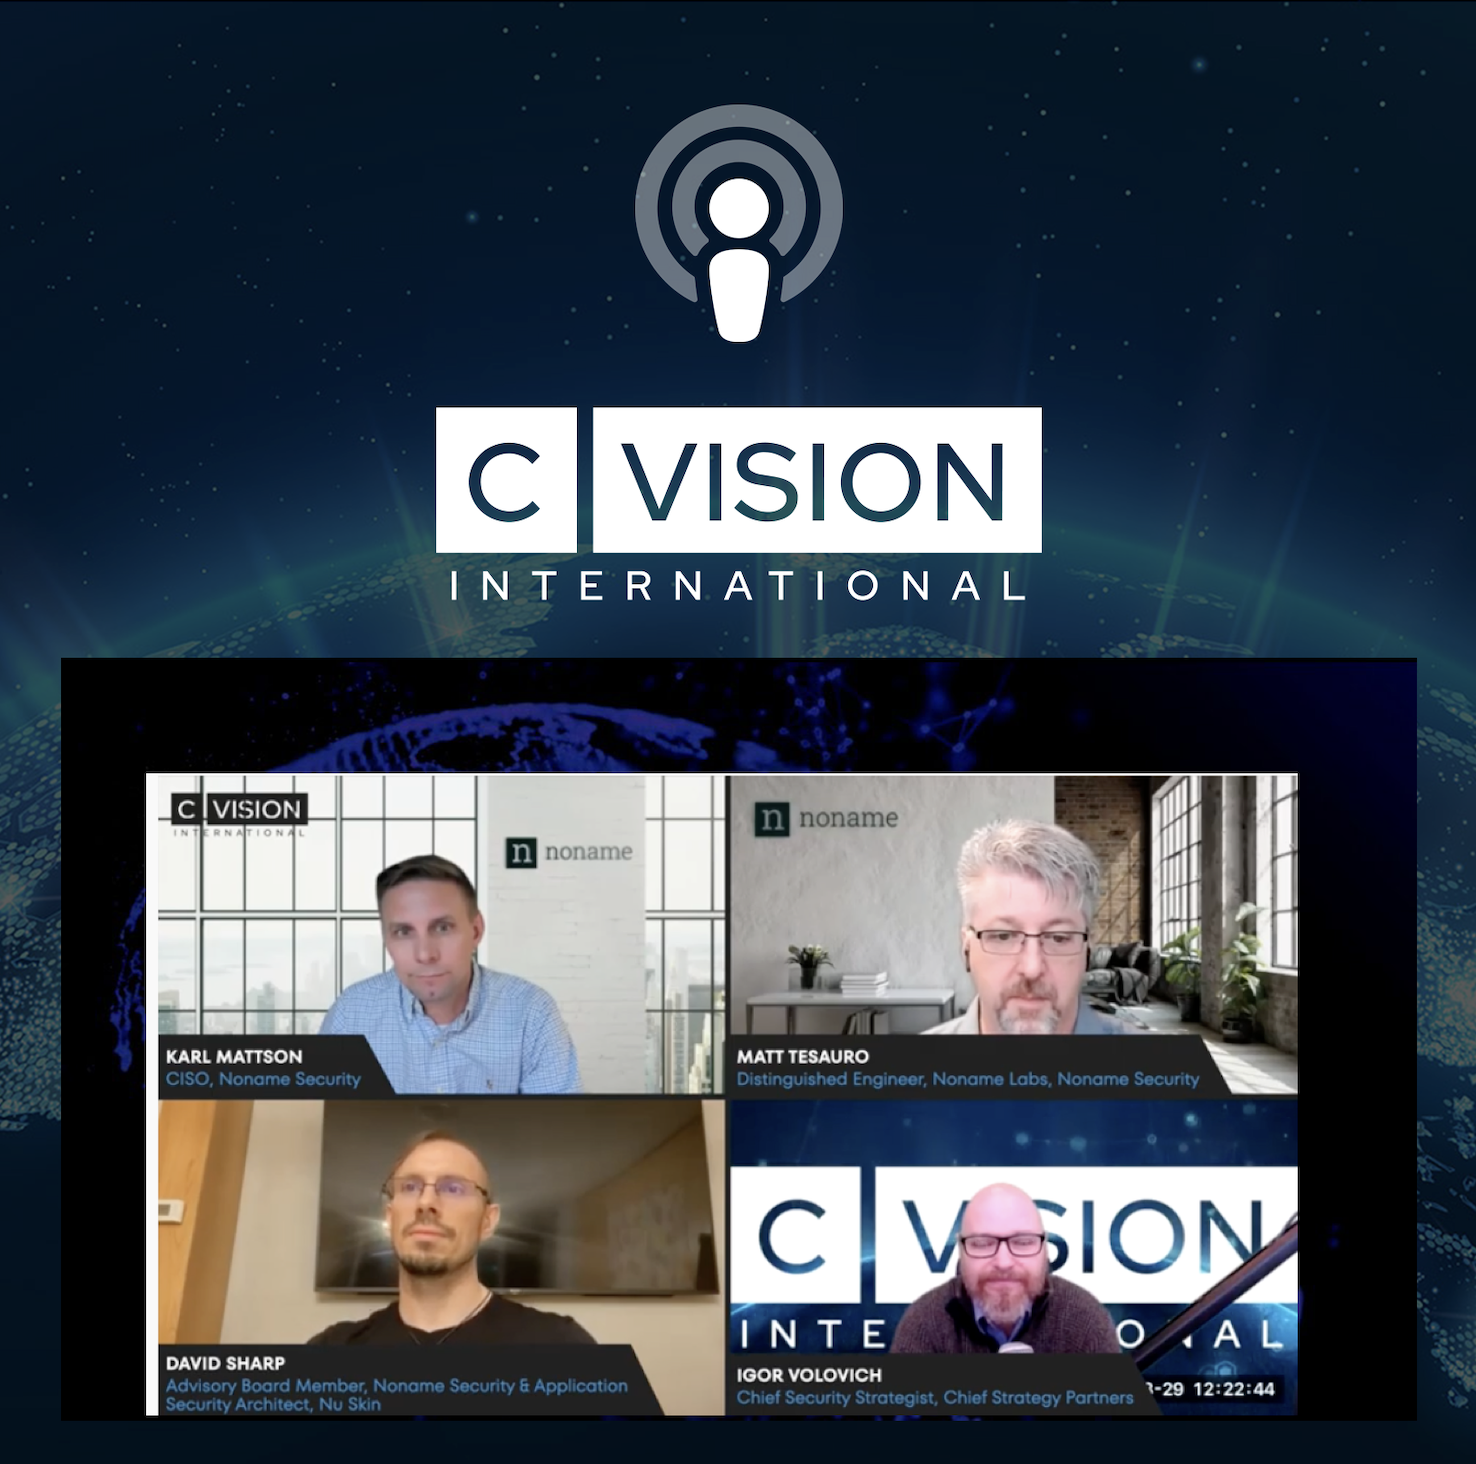 Noname Security Thought Leadership featuring Karl Mattson, CISO, Noname Security, David Sharp, Advisory Board Member at Noname Security & Application Security Architect at Nu Skin, Matt Tesauro, Distinguished Engineer, Noname Labs, Noname Security & Igor